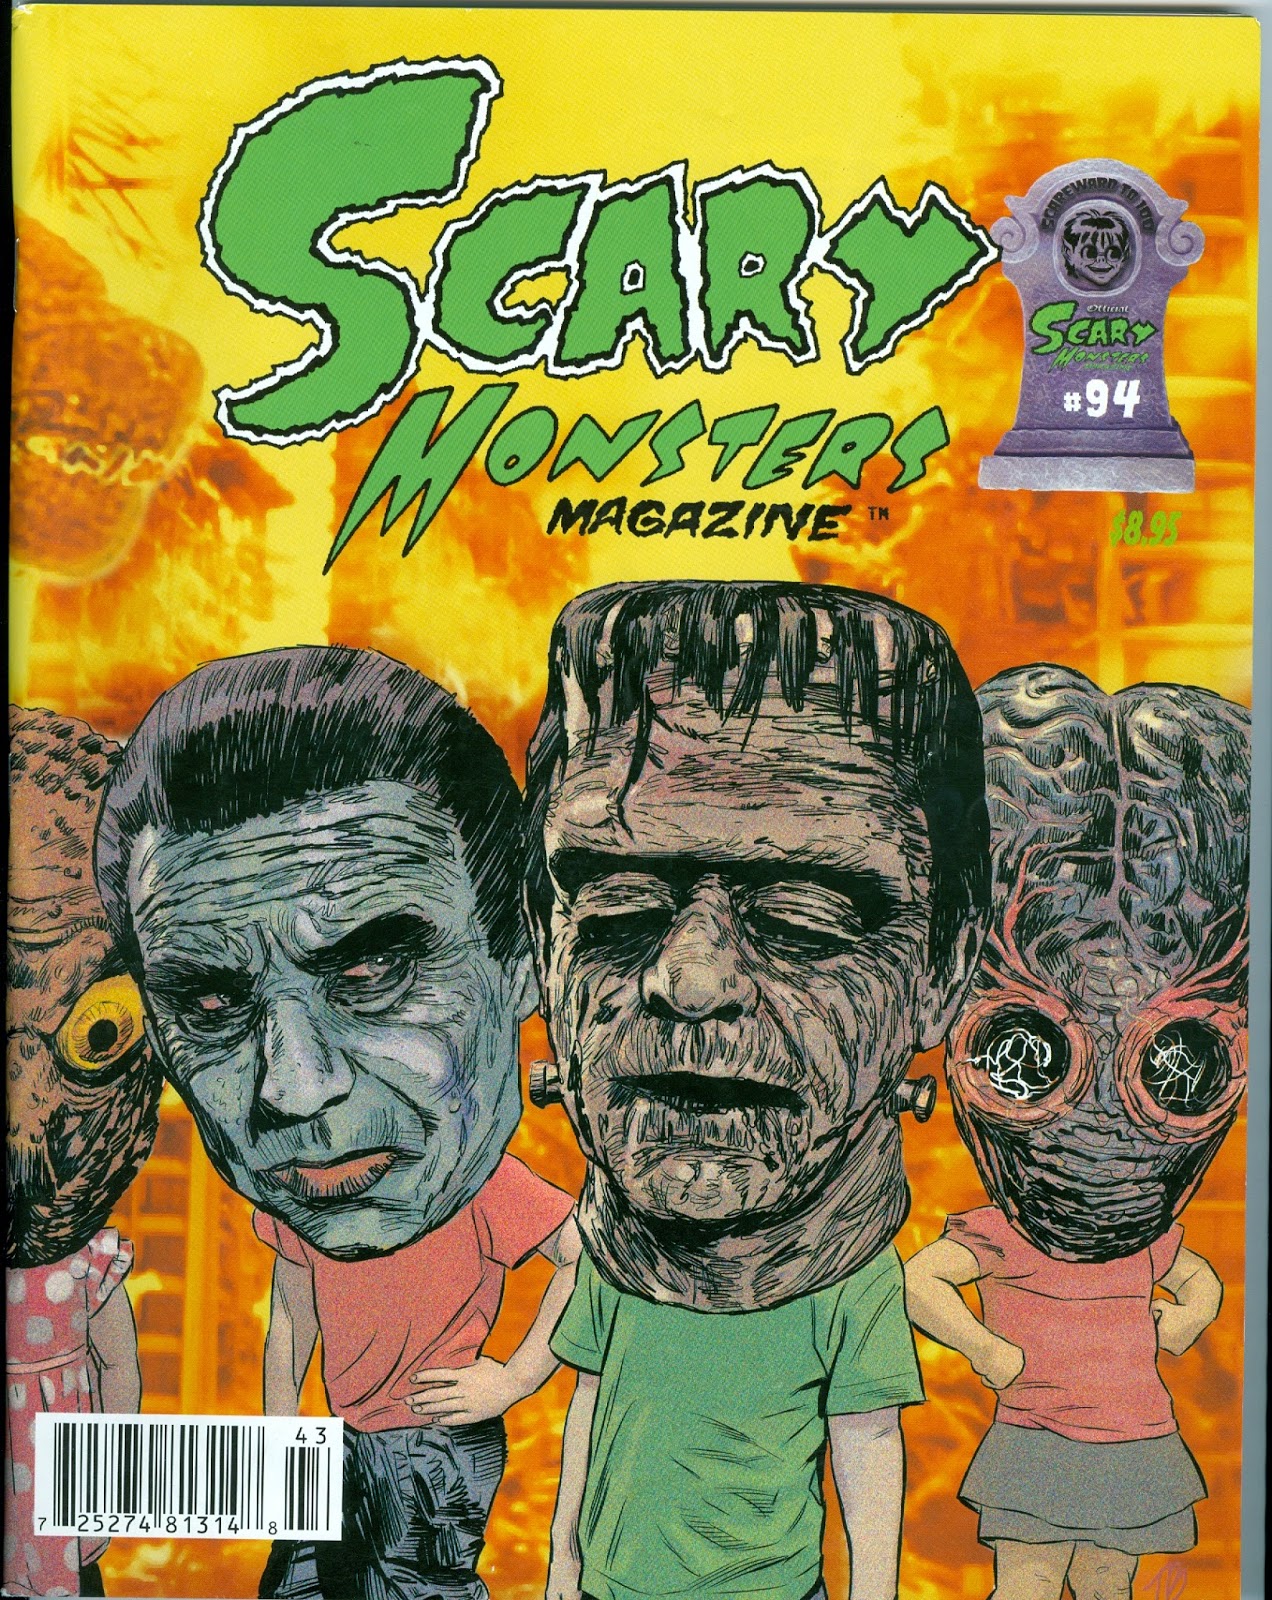 Dr. Gangrene's Mad Blog: Scary Monsters Magazine1272 x 1600